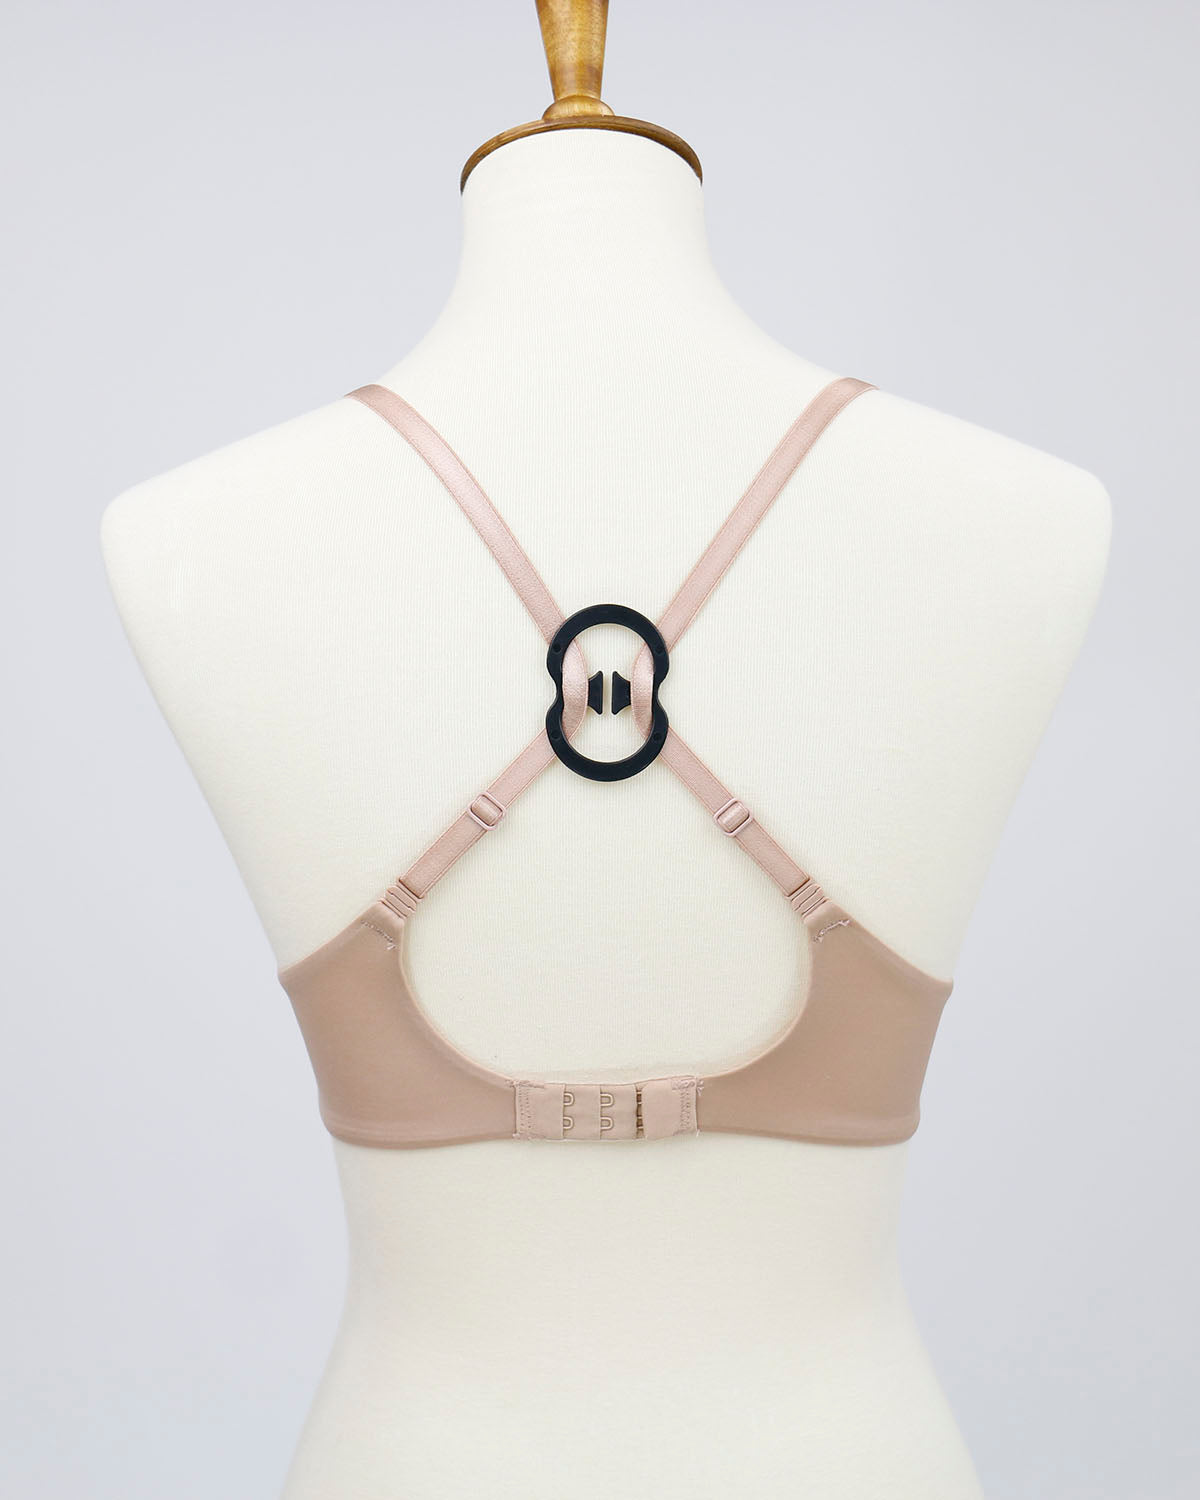 Best Bra Strap Holder-small/med-3 colors available-bra accessories